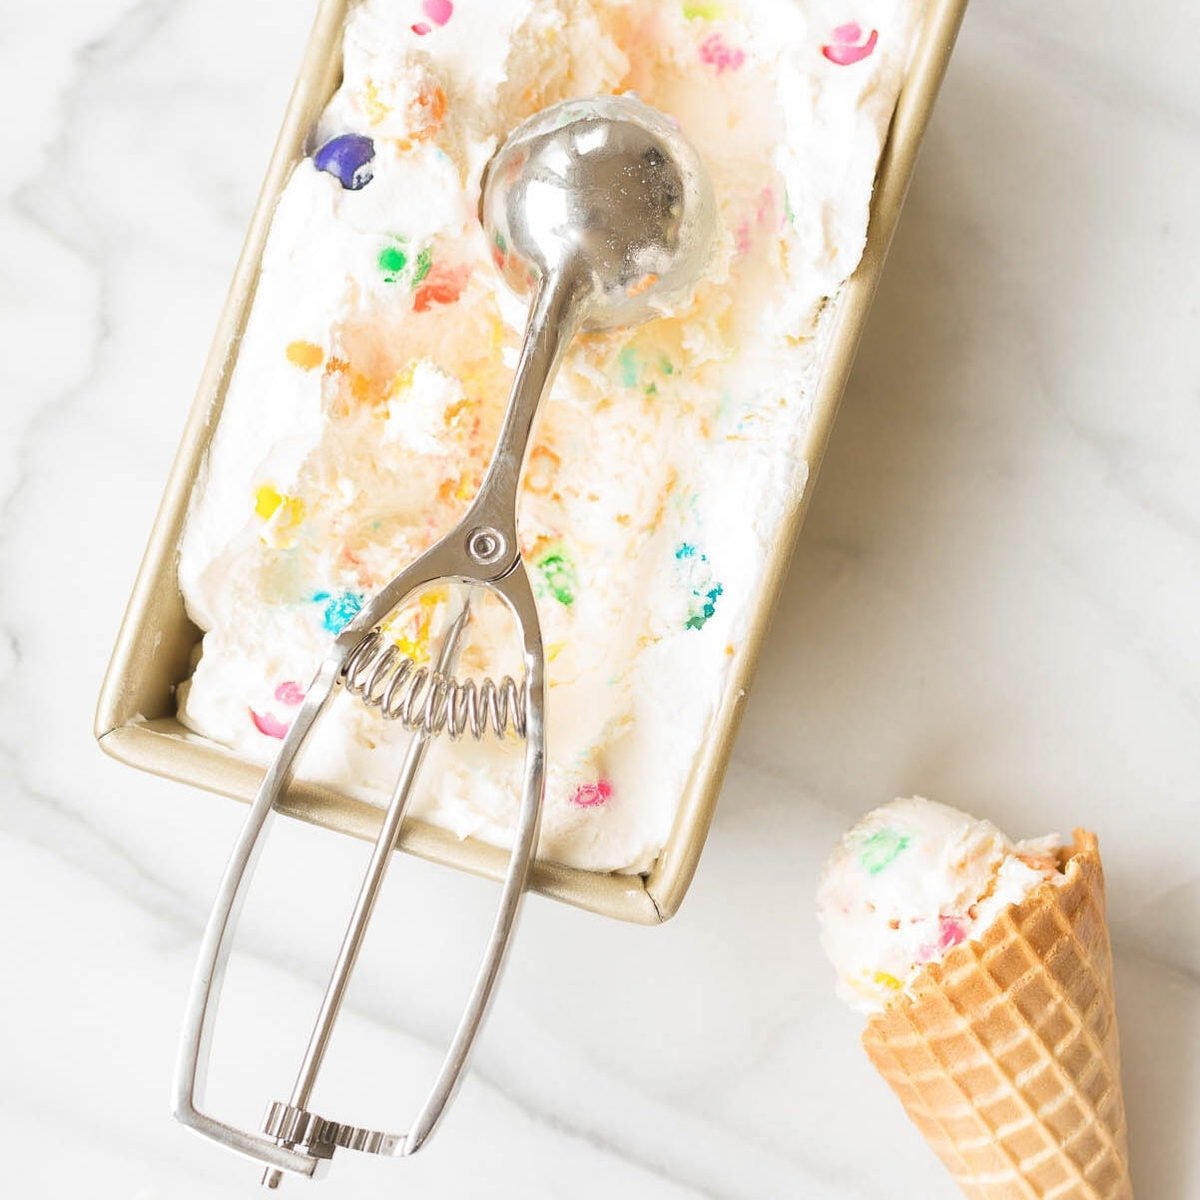 Bubble gum ice cream frozen into a gold loaf pan, with a cone to the side.